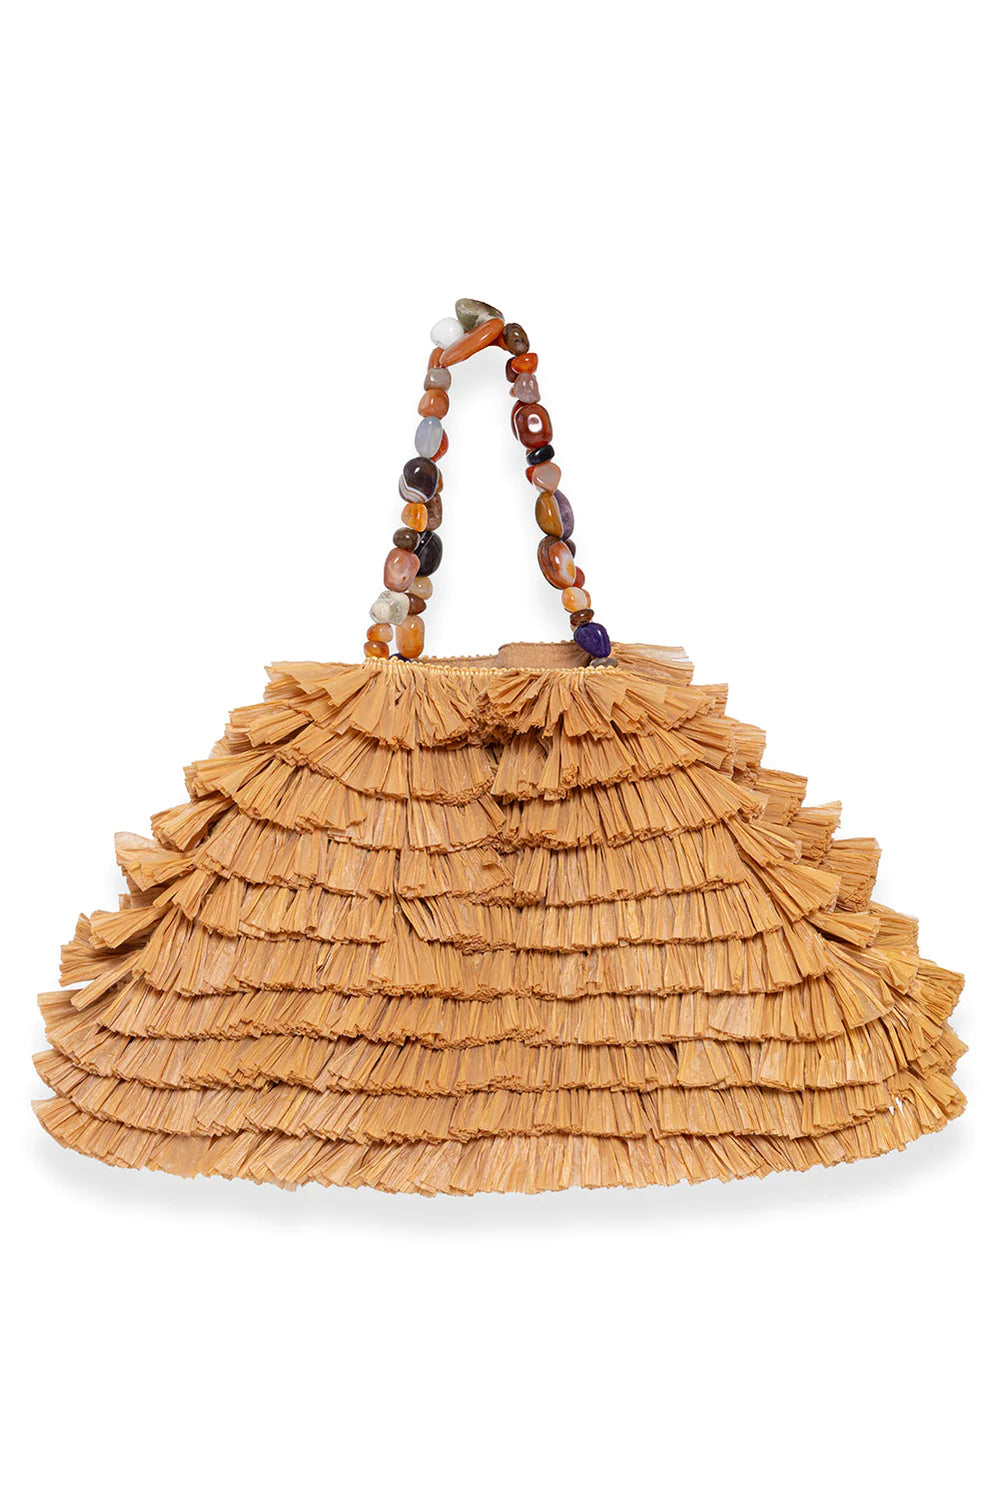 Layered raffia oblong bag with stone beaded handles and gold metallic clip fastening